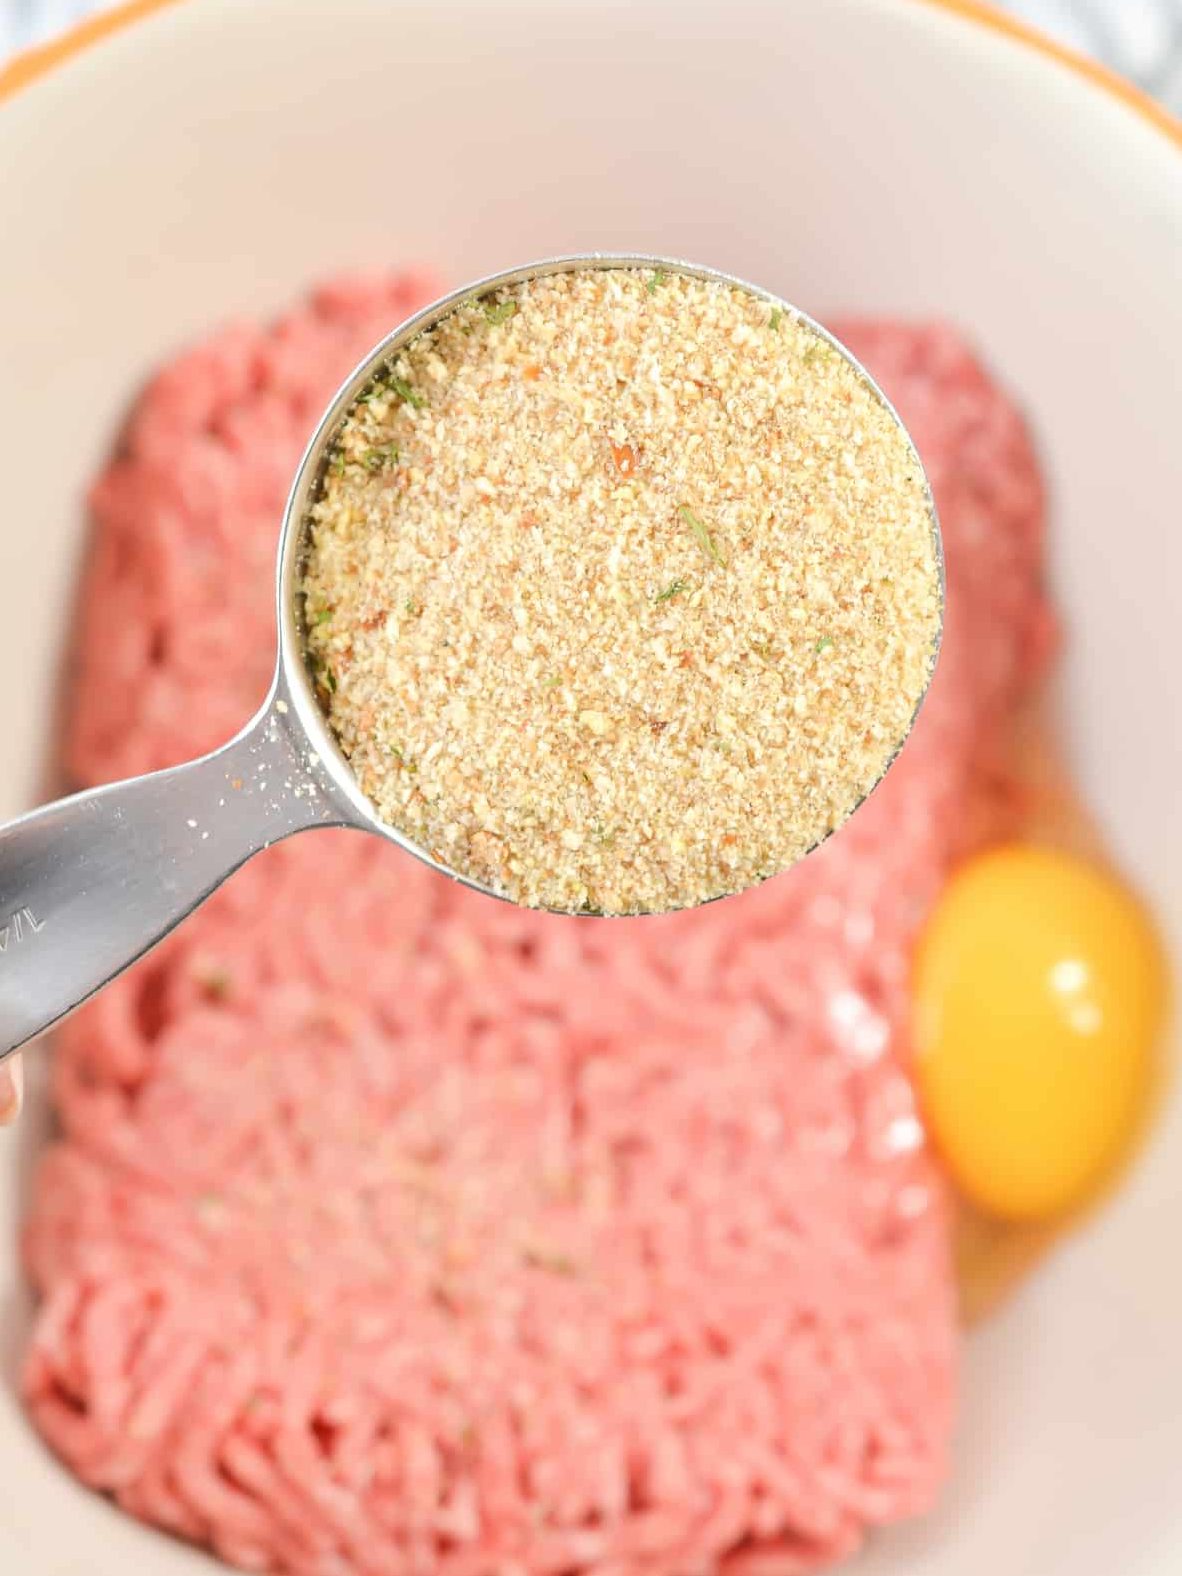 In a bowl, combine 1 lb of ground beef, ¼ cup of breadcrumbs, and 1 large egg.